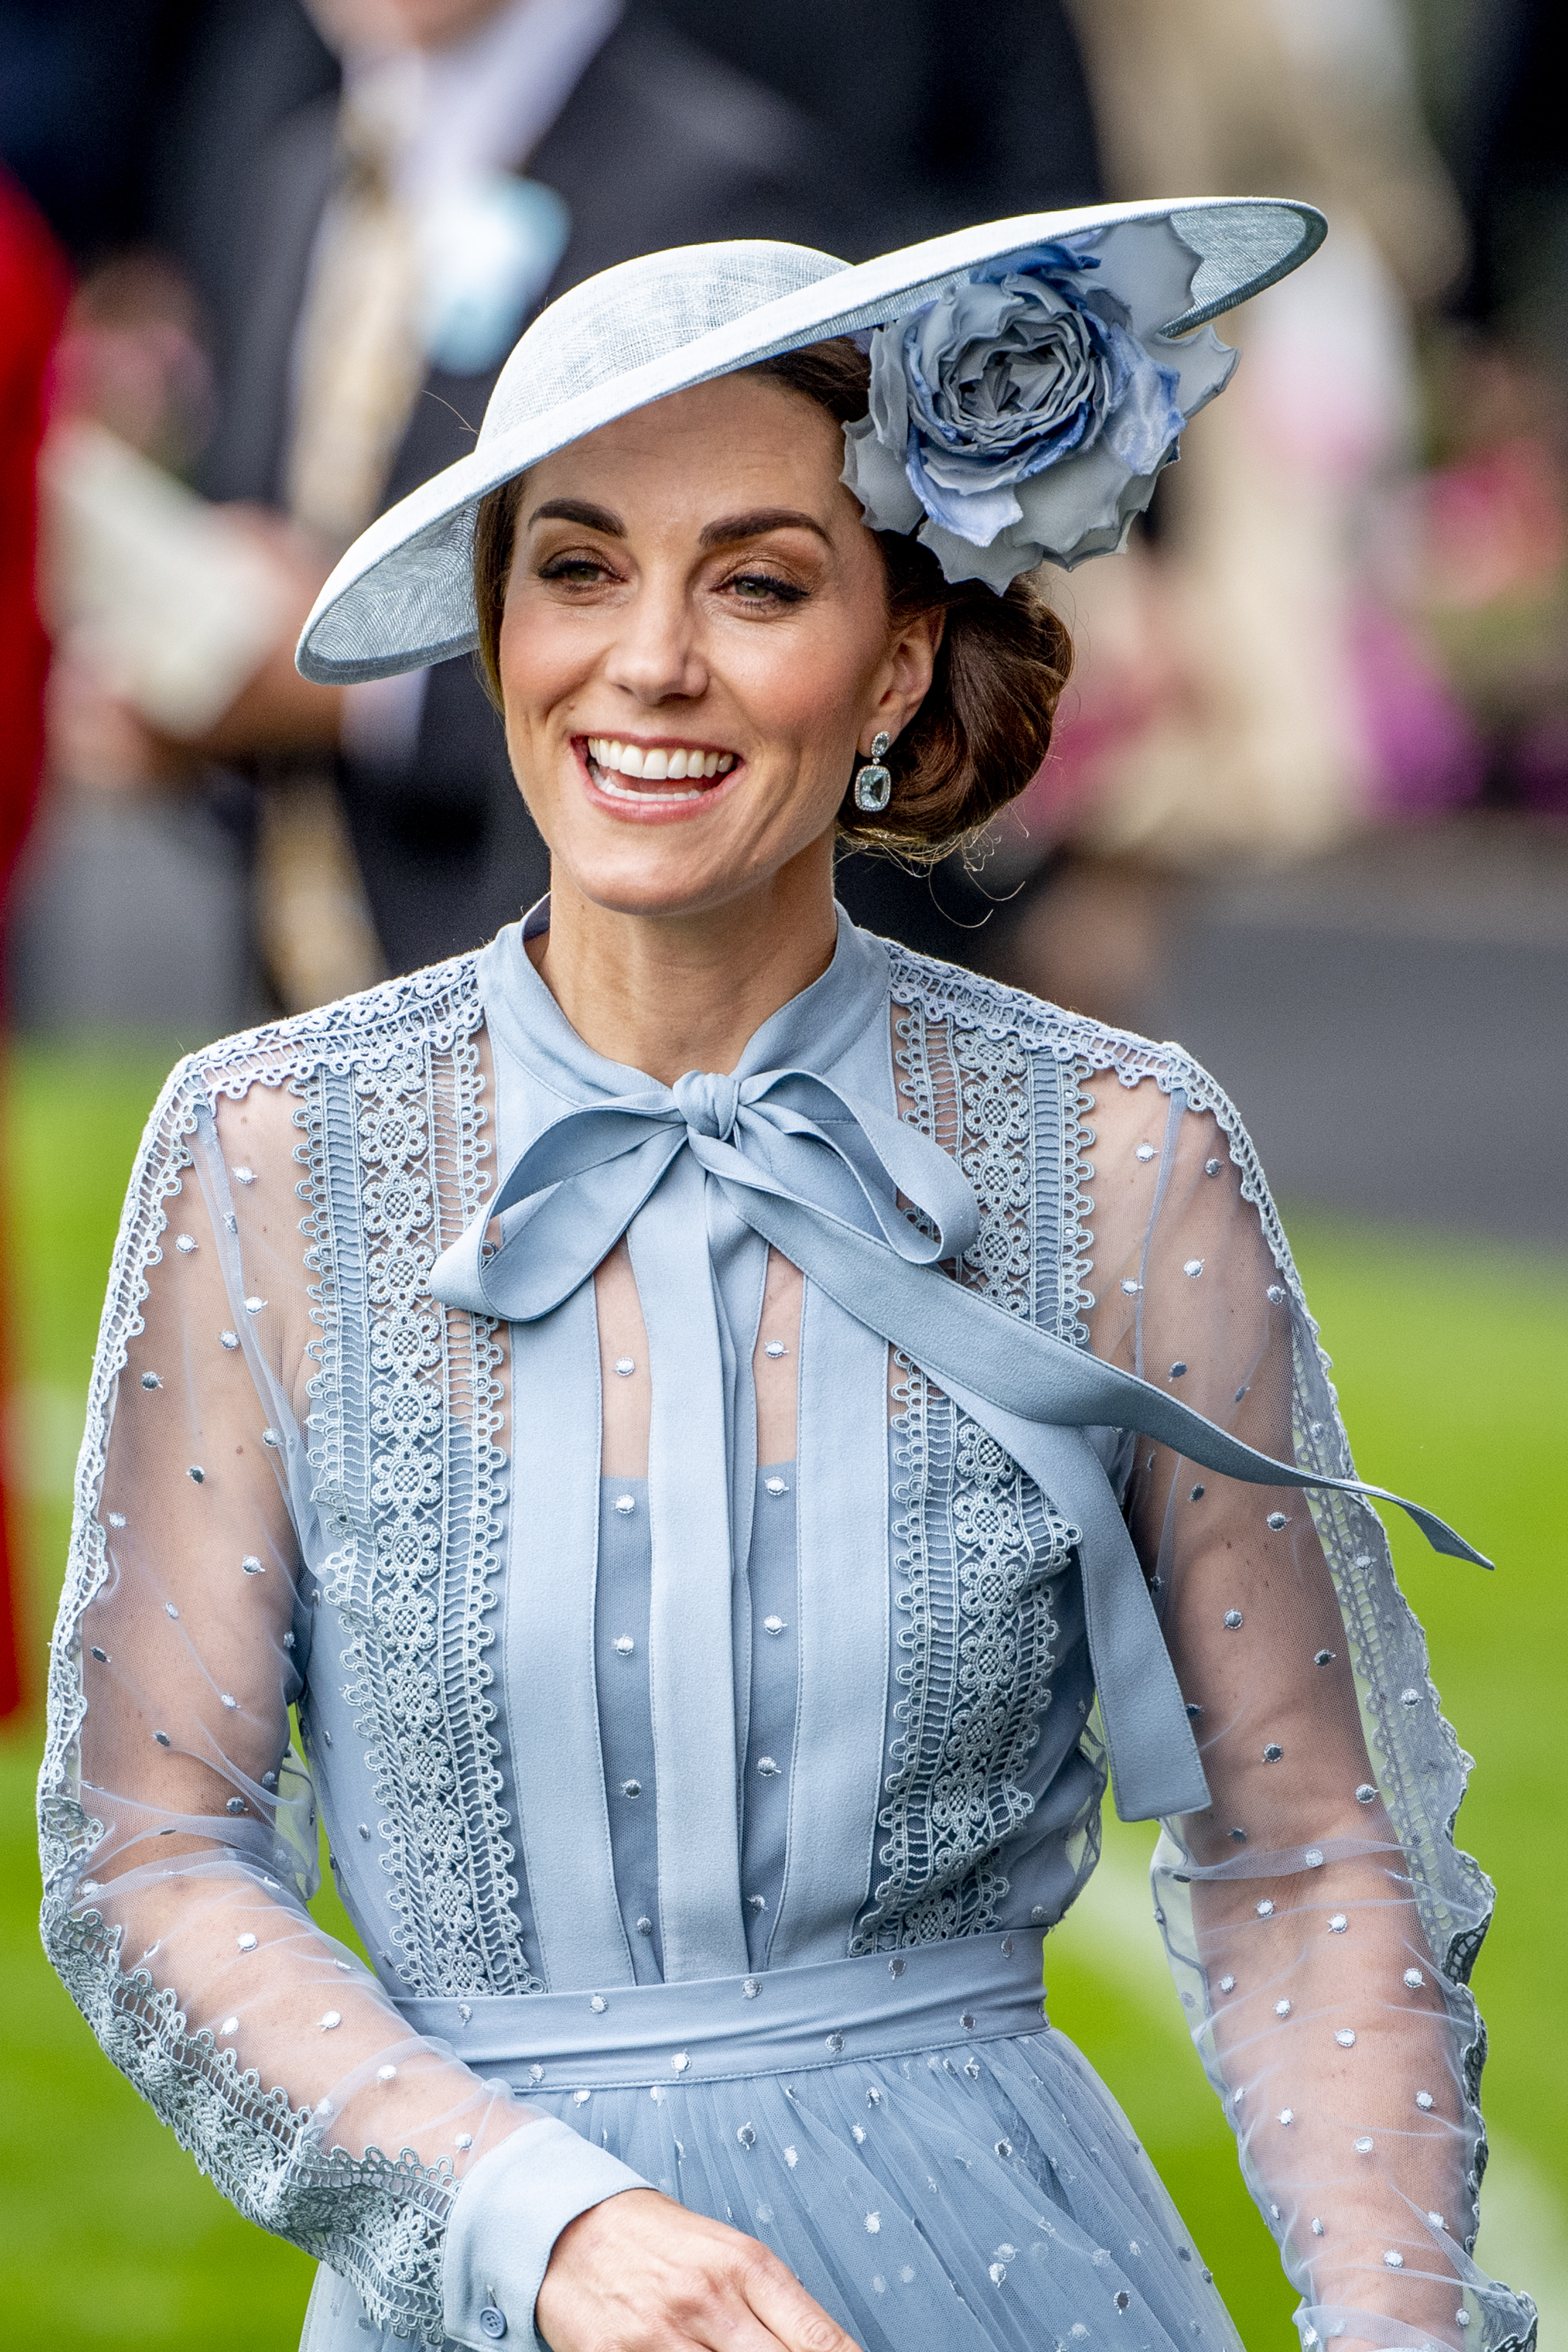 Princess Catherine at day one of the Royal Ascot in Ascot, England on June 18, 2019 | Source: Getty Images